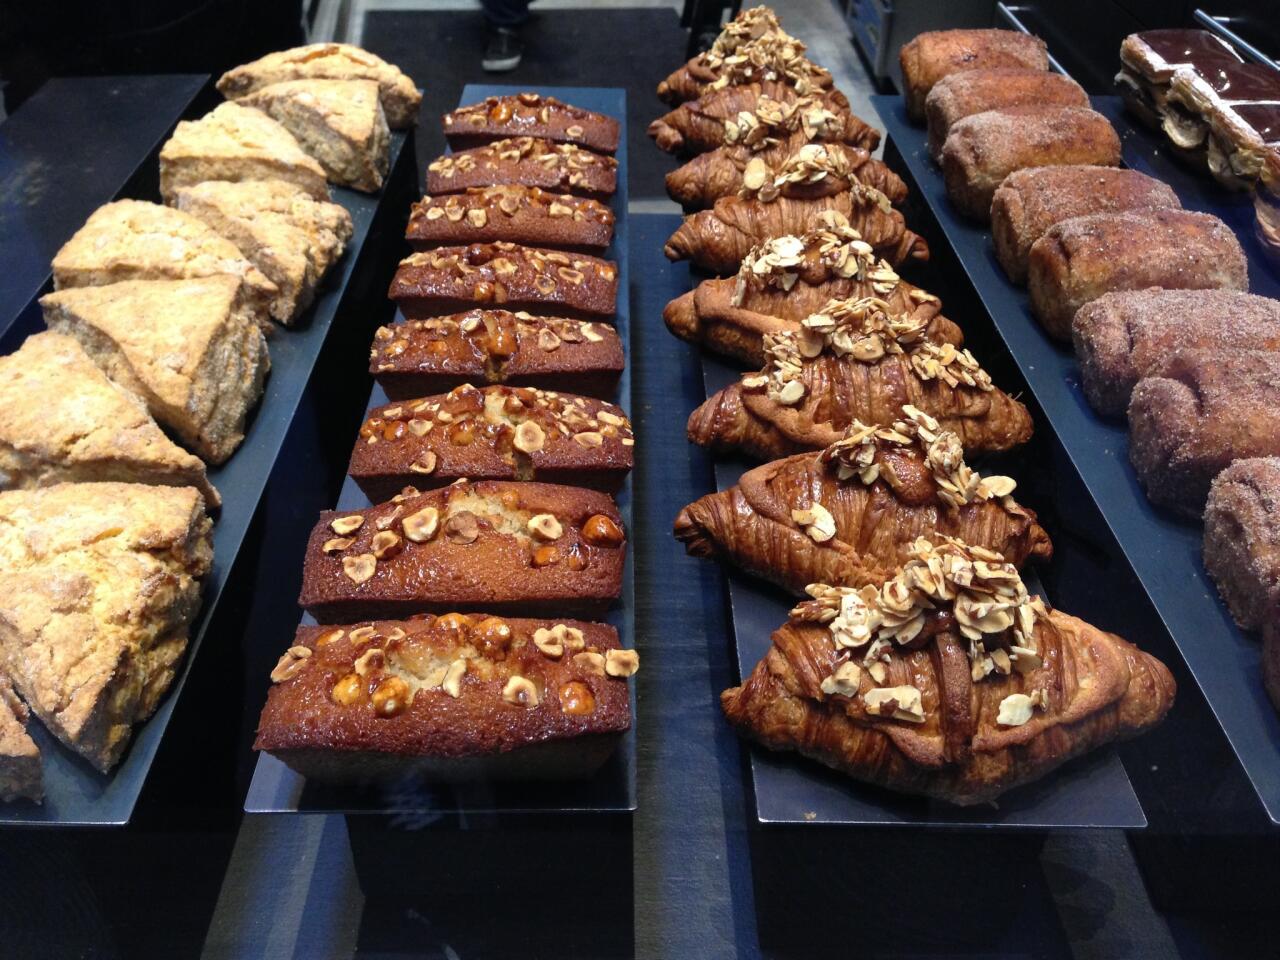 Pastries in the case at Craftsman and Wolves